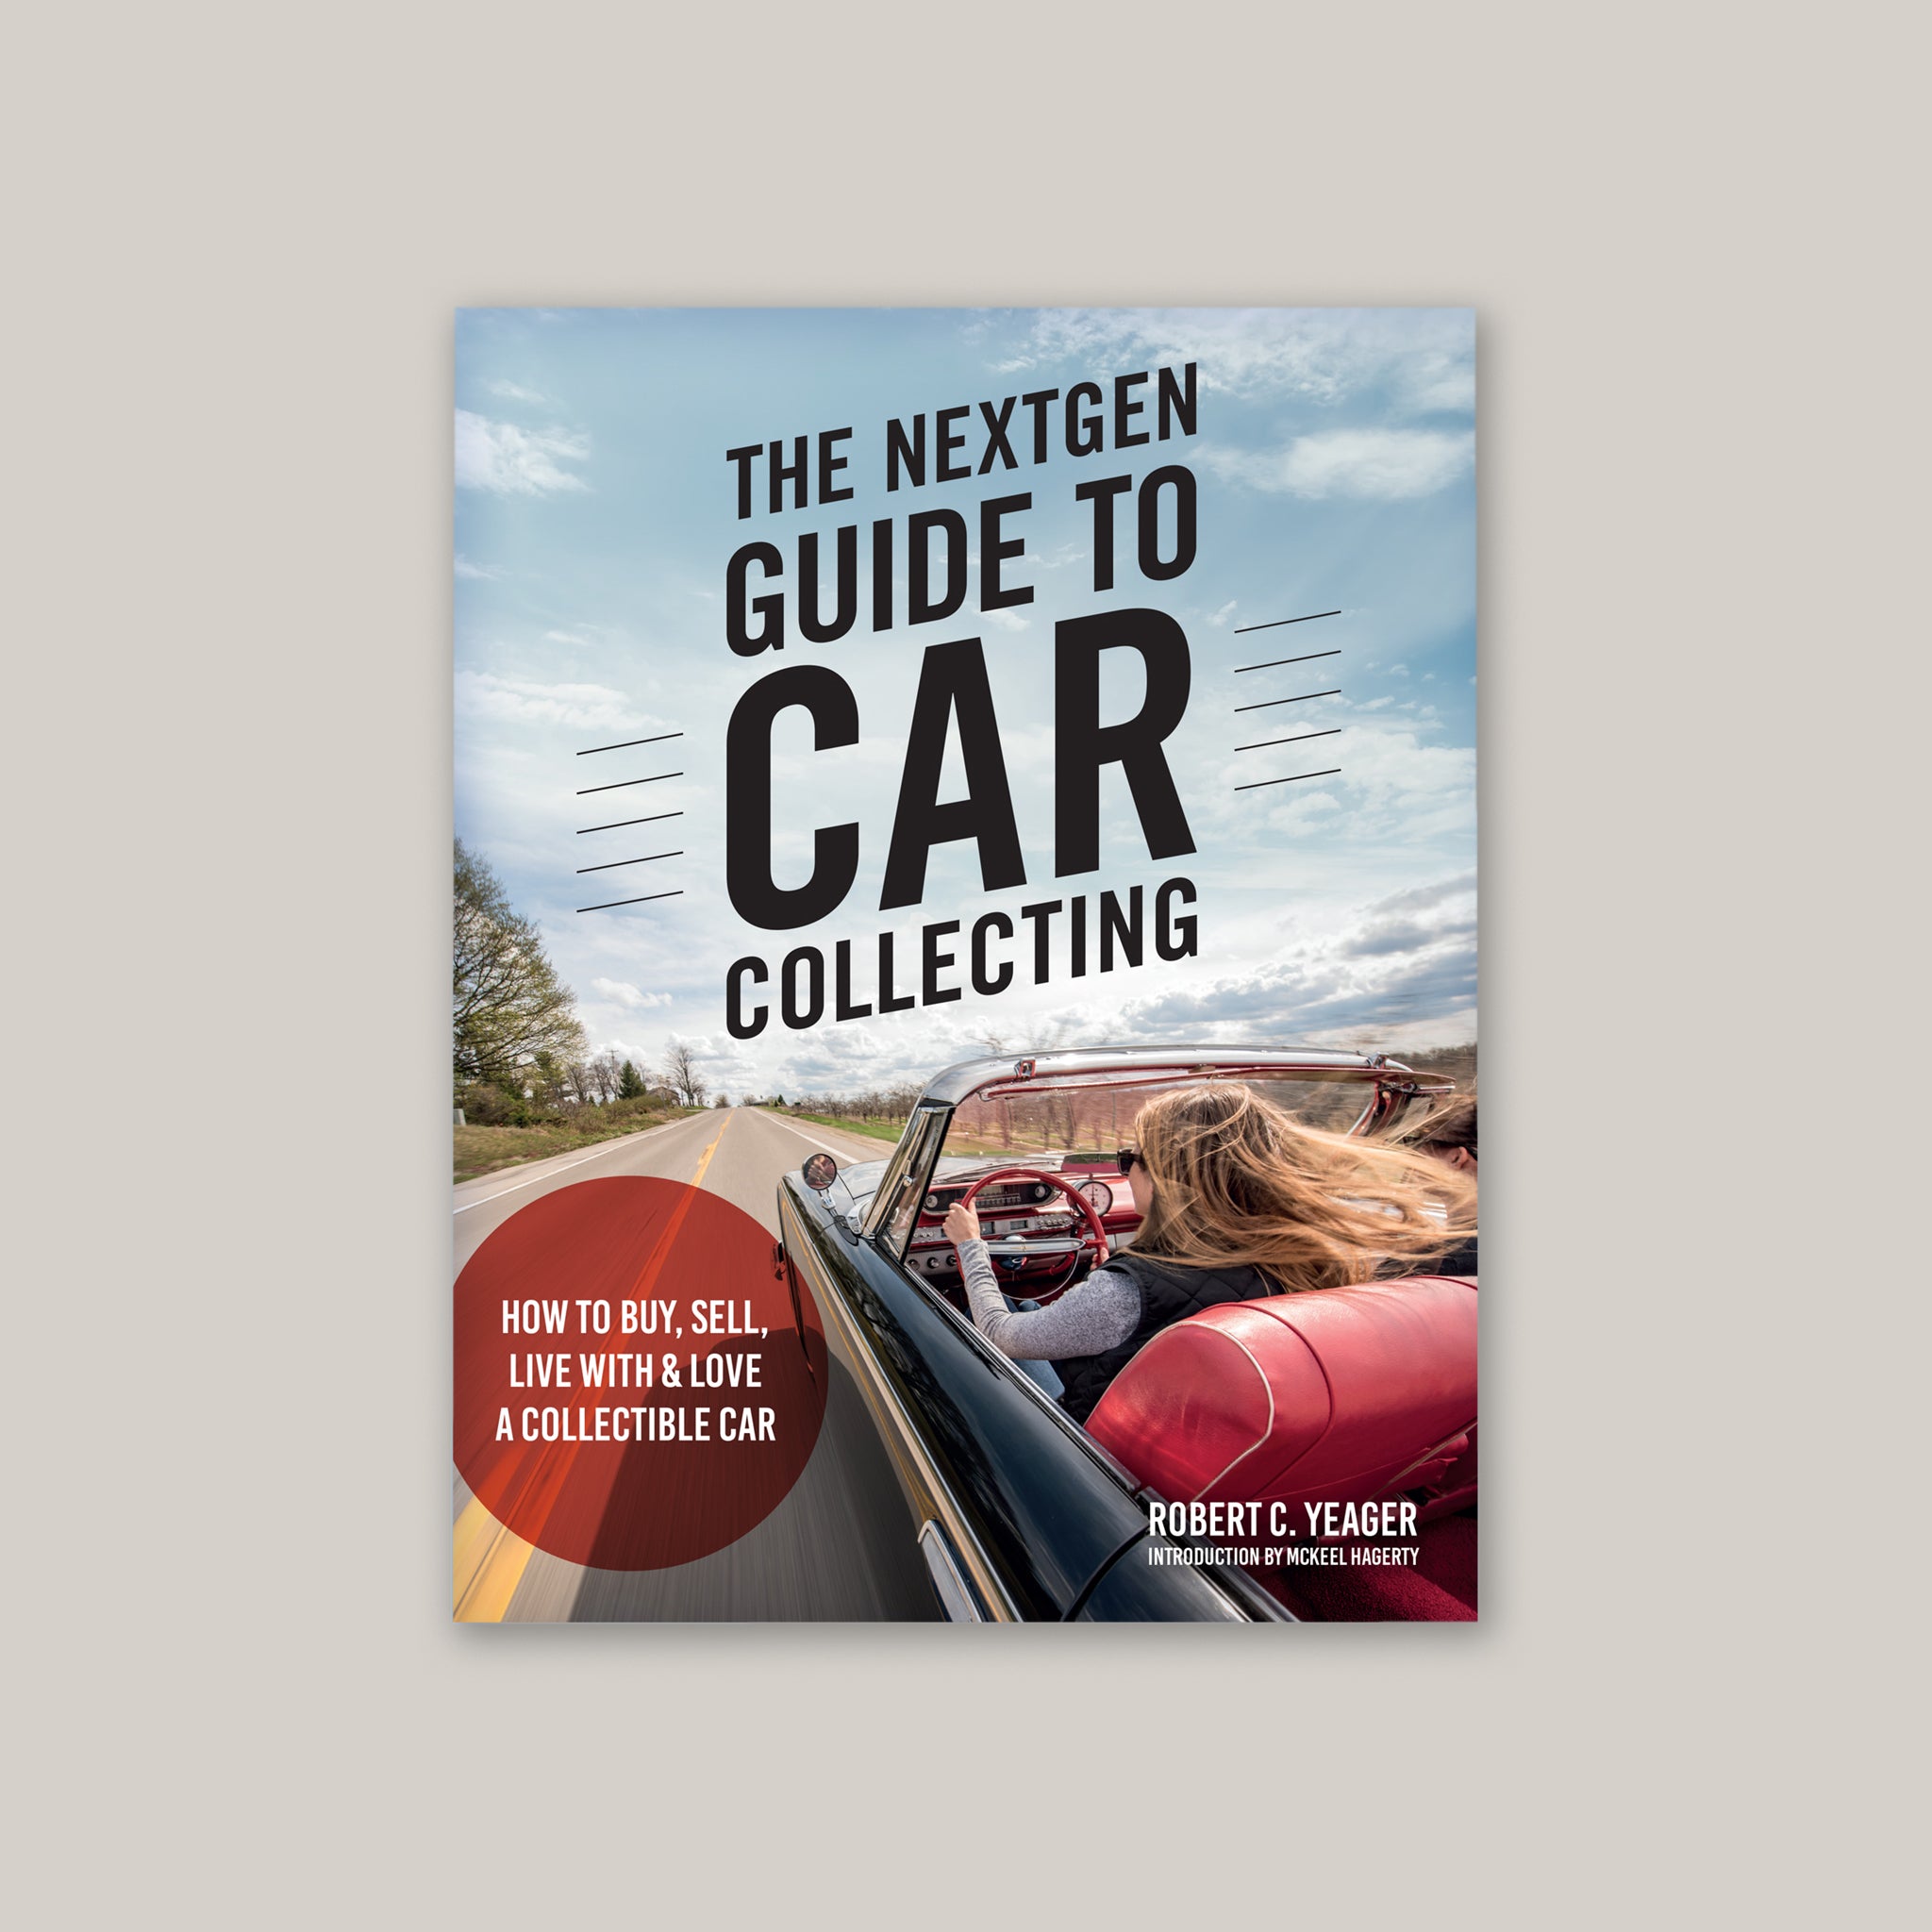 The Next Gen Guide to Car Collecting